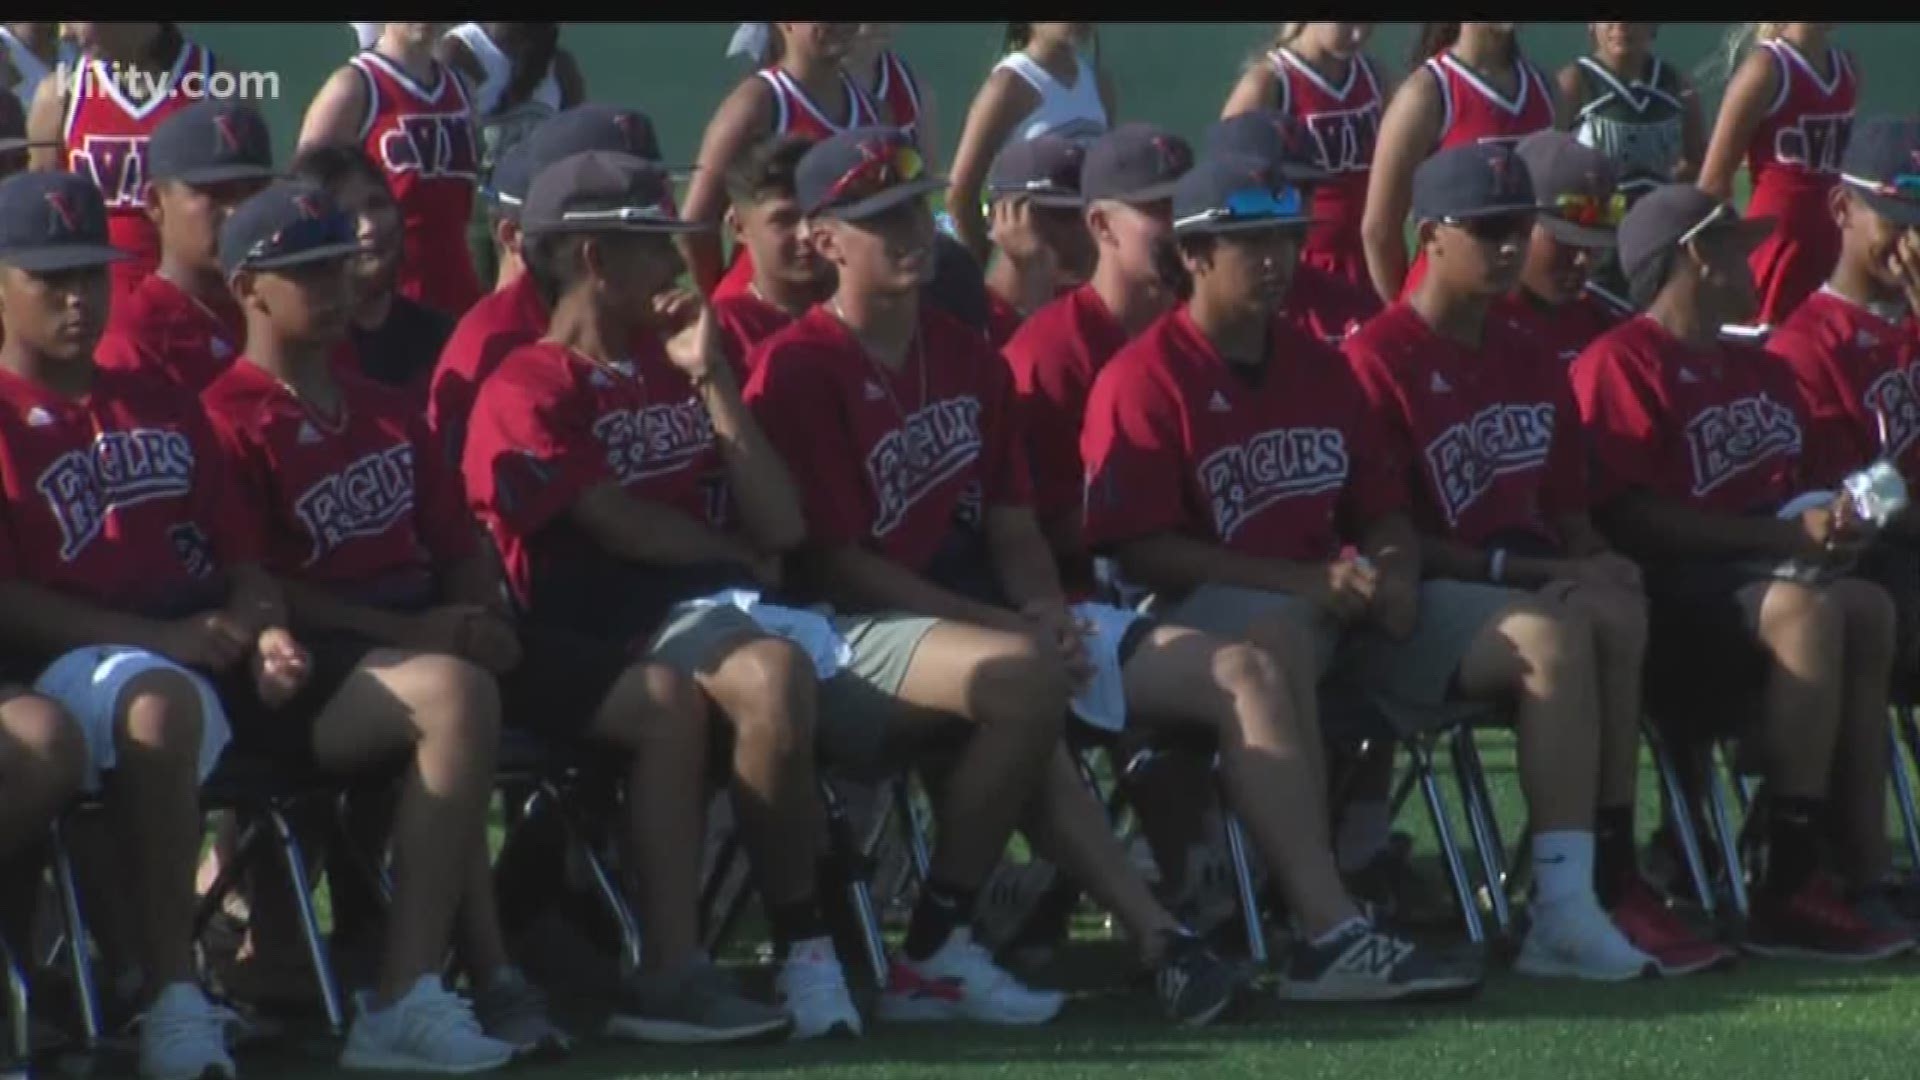 The Eagles' baseball team was give then first ever community-wide state send-off pep rally Tuesday night at Cabaniss.